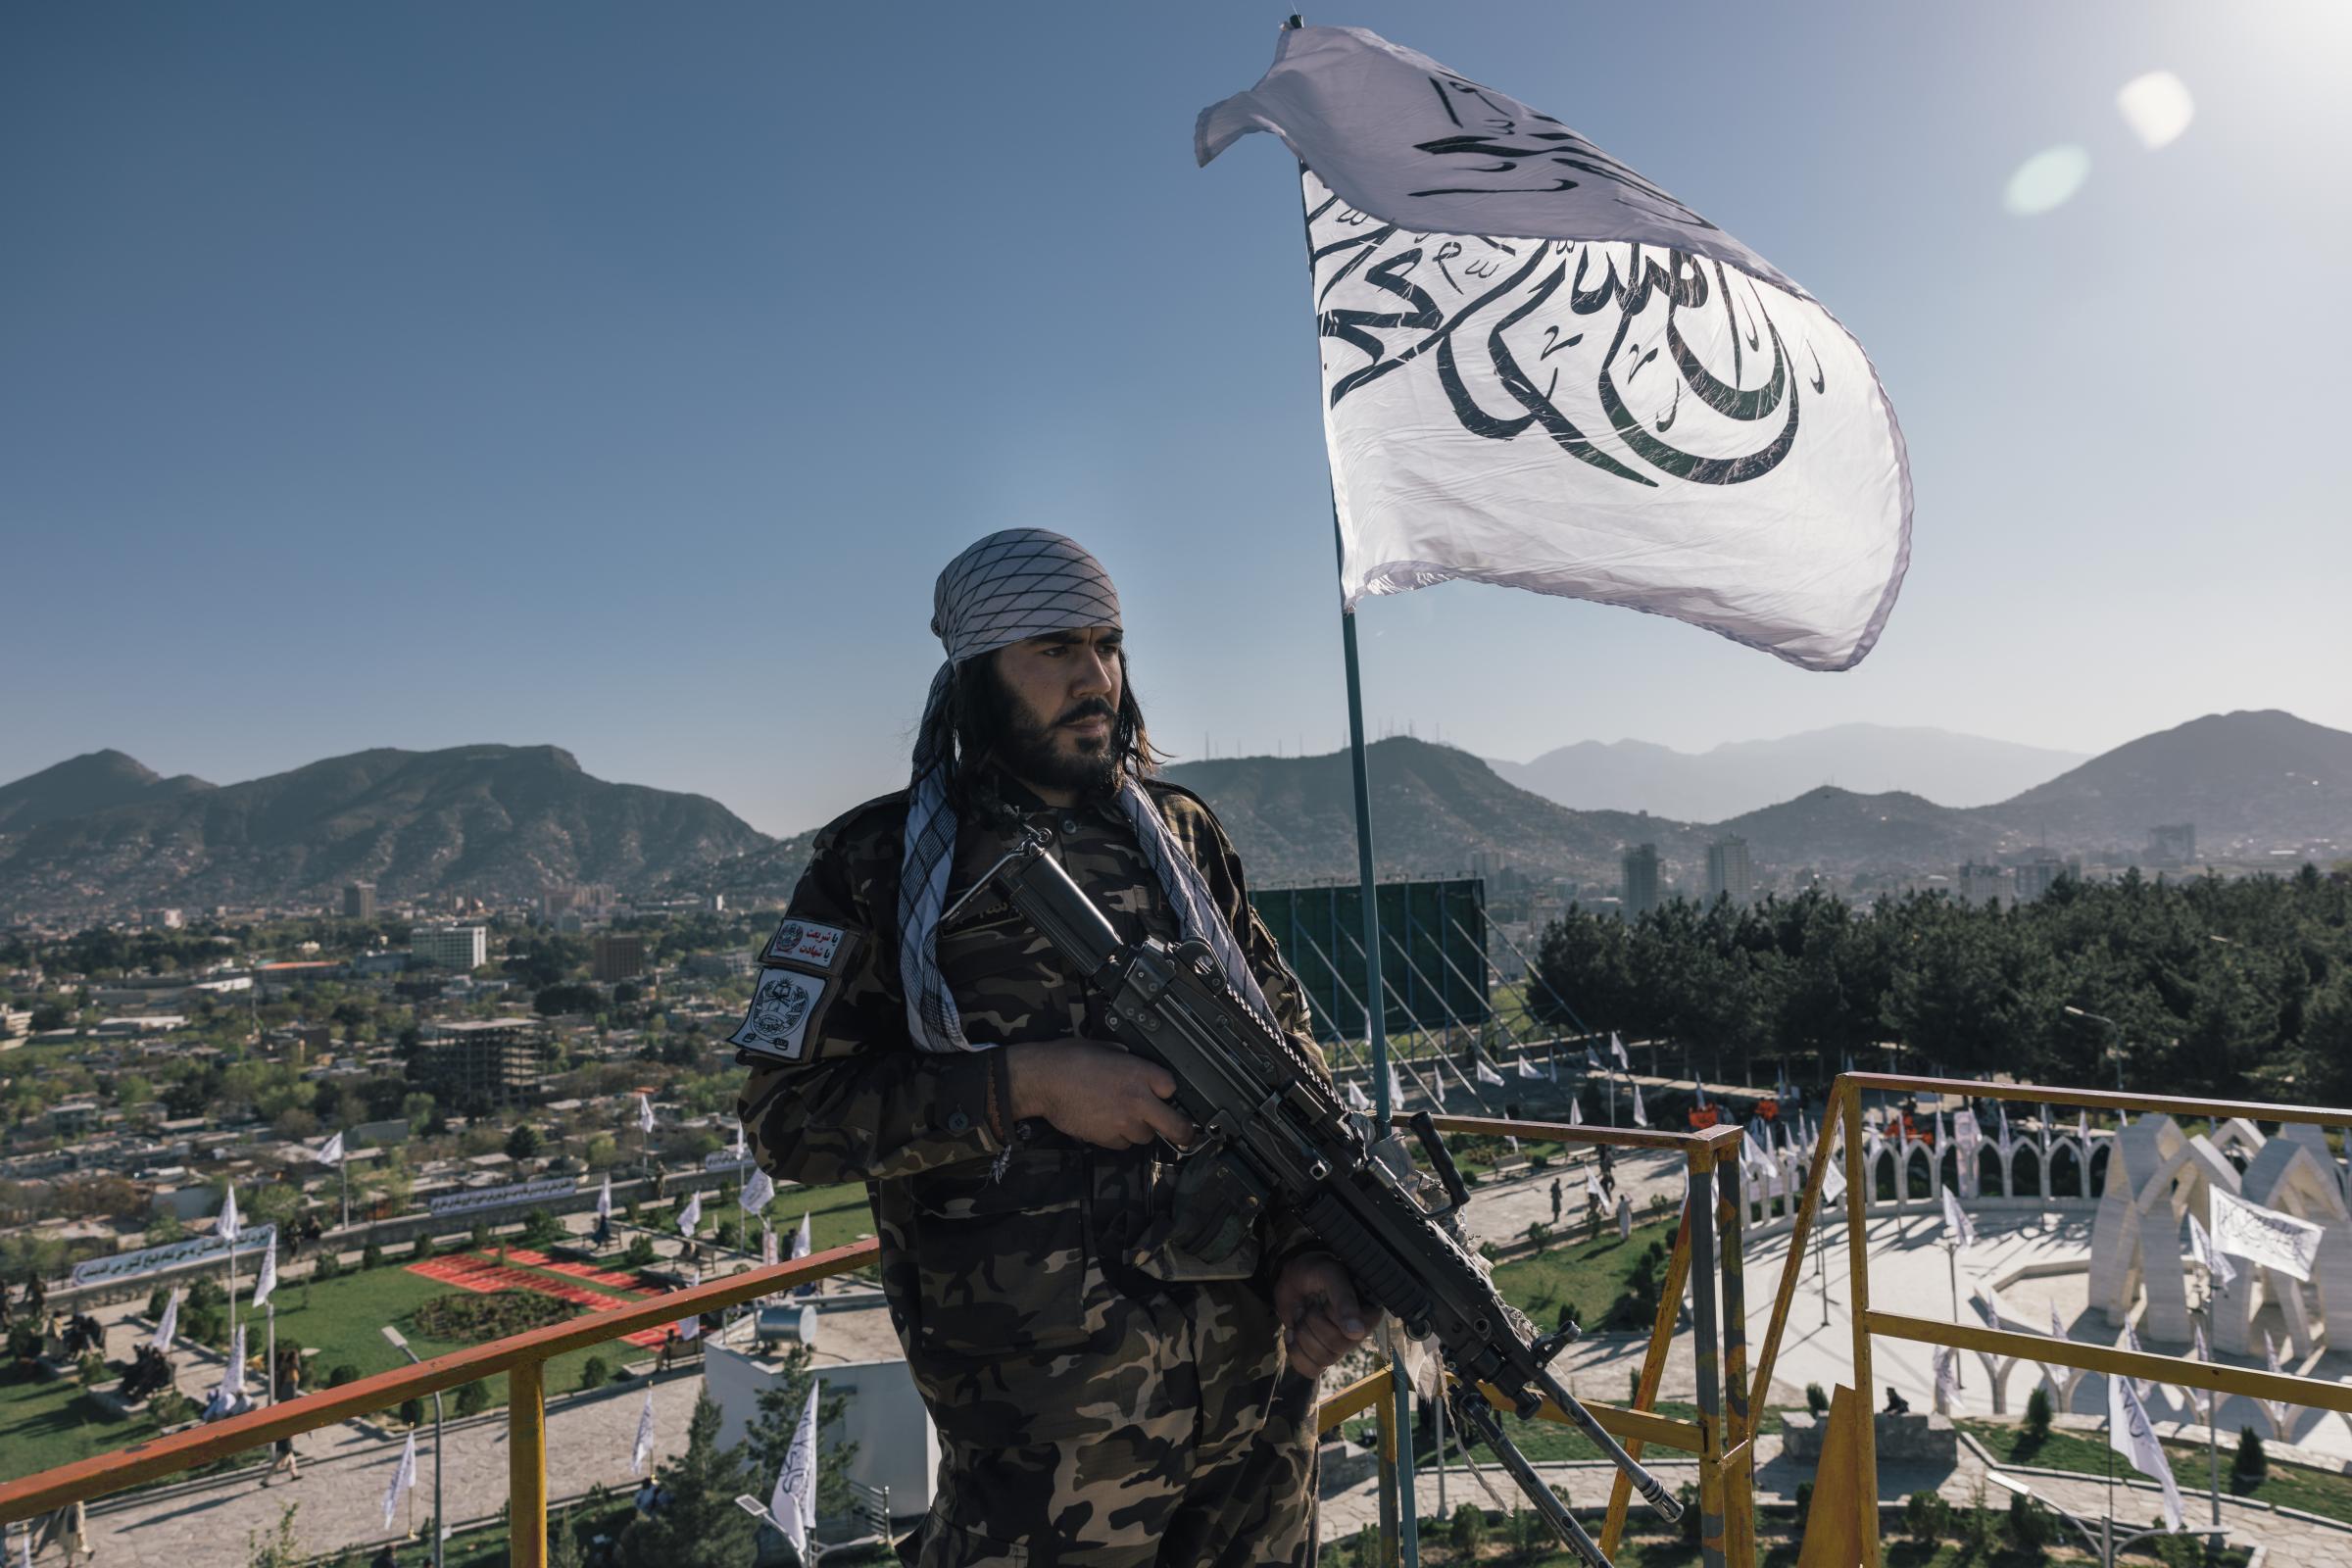 A Taliban fighter during a cerenomy of the Emirate on Wazir Akbar Khan hill in Kabul.